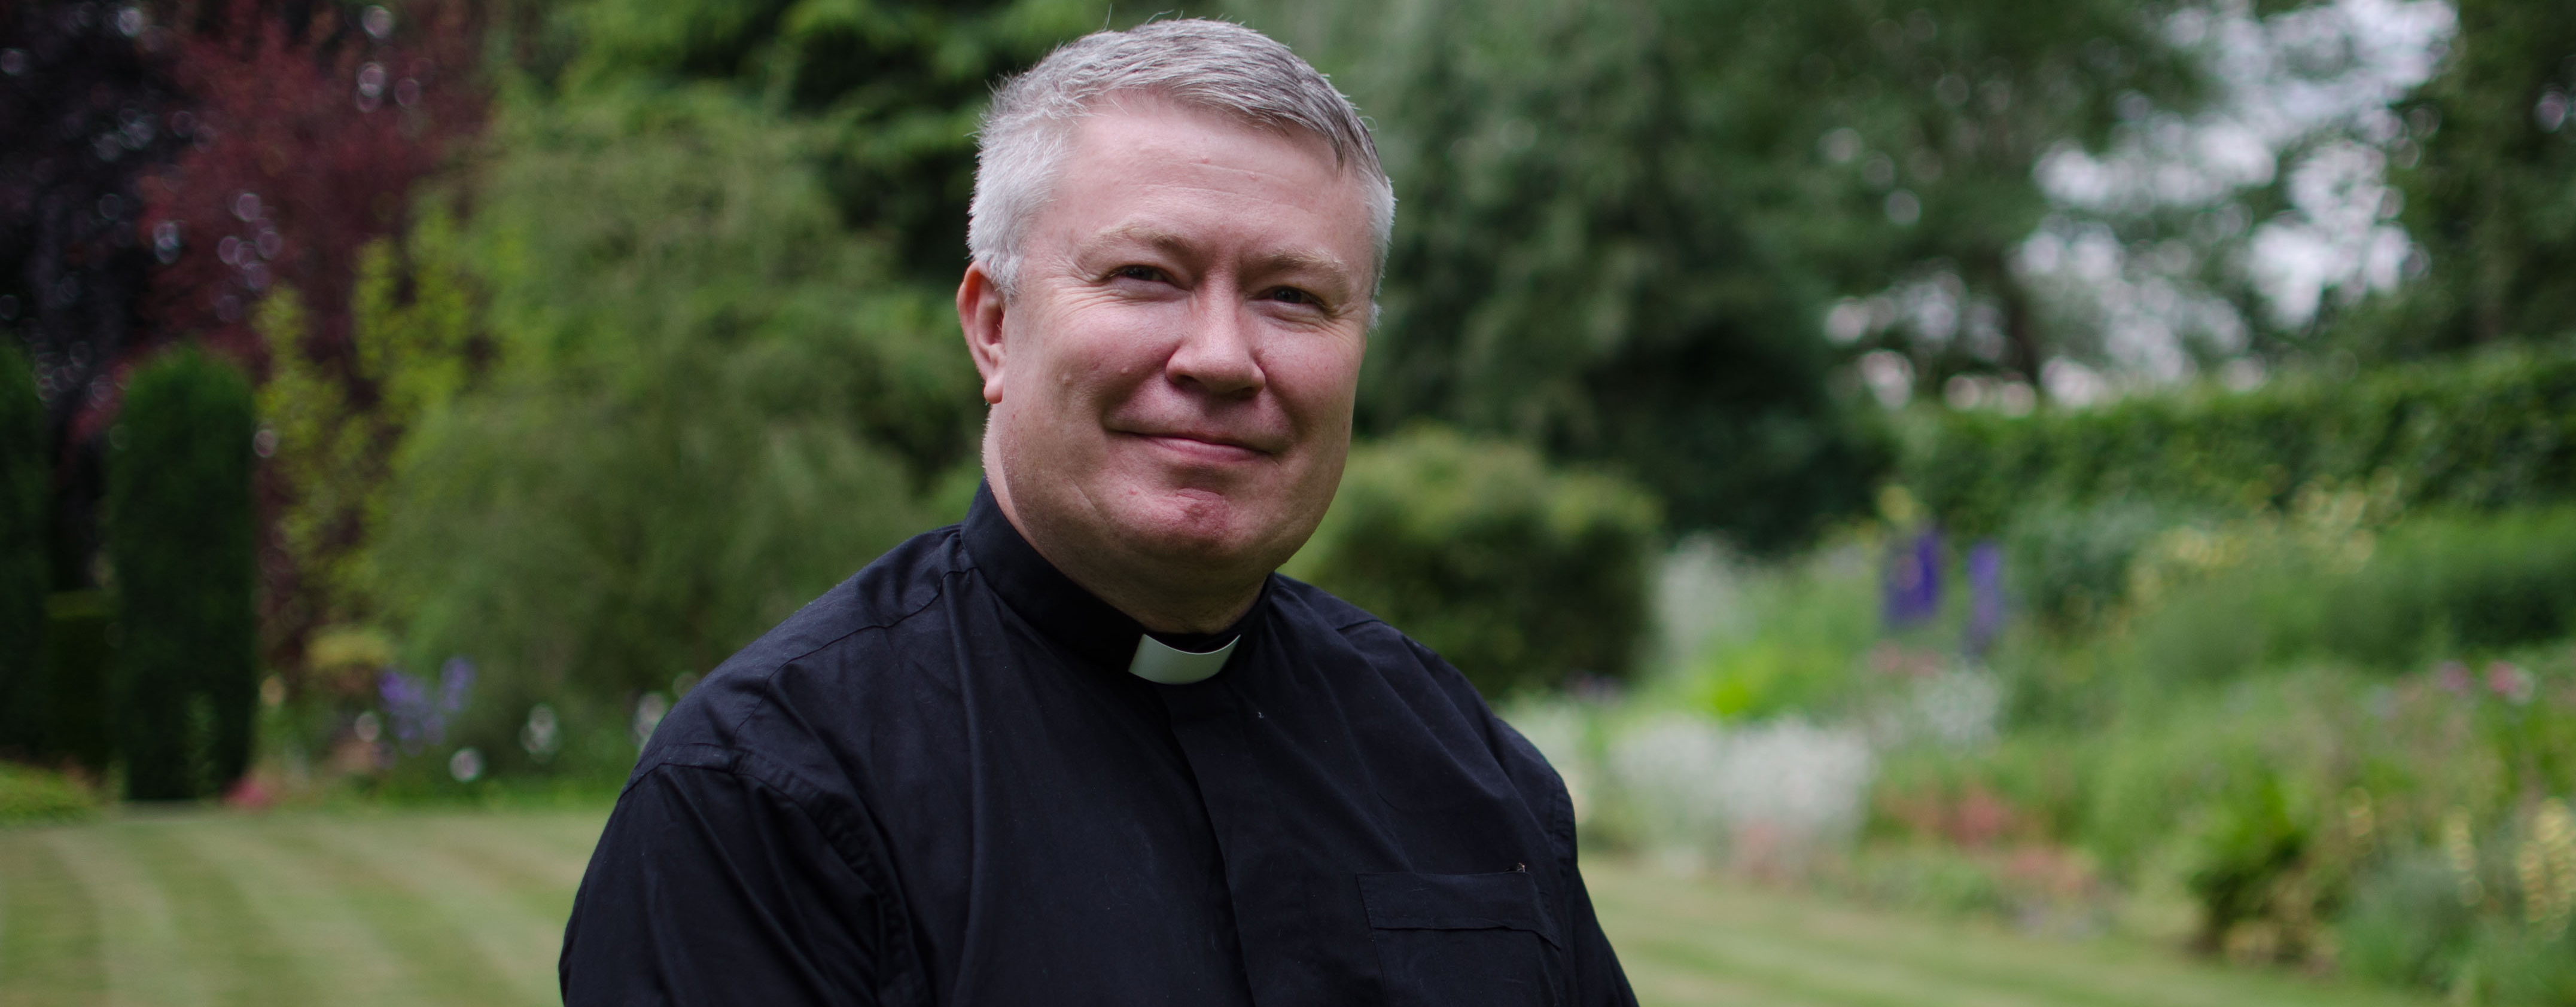 Open Gary Crellin appointed Vicar of Powick & Guarlford & Madresfield with Newland